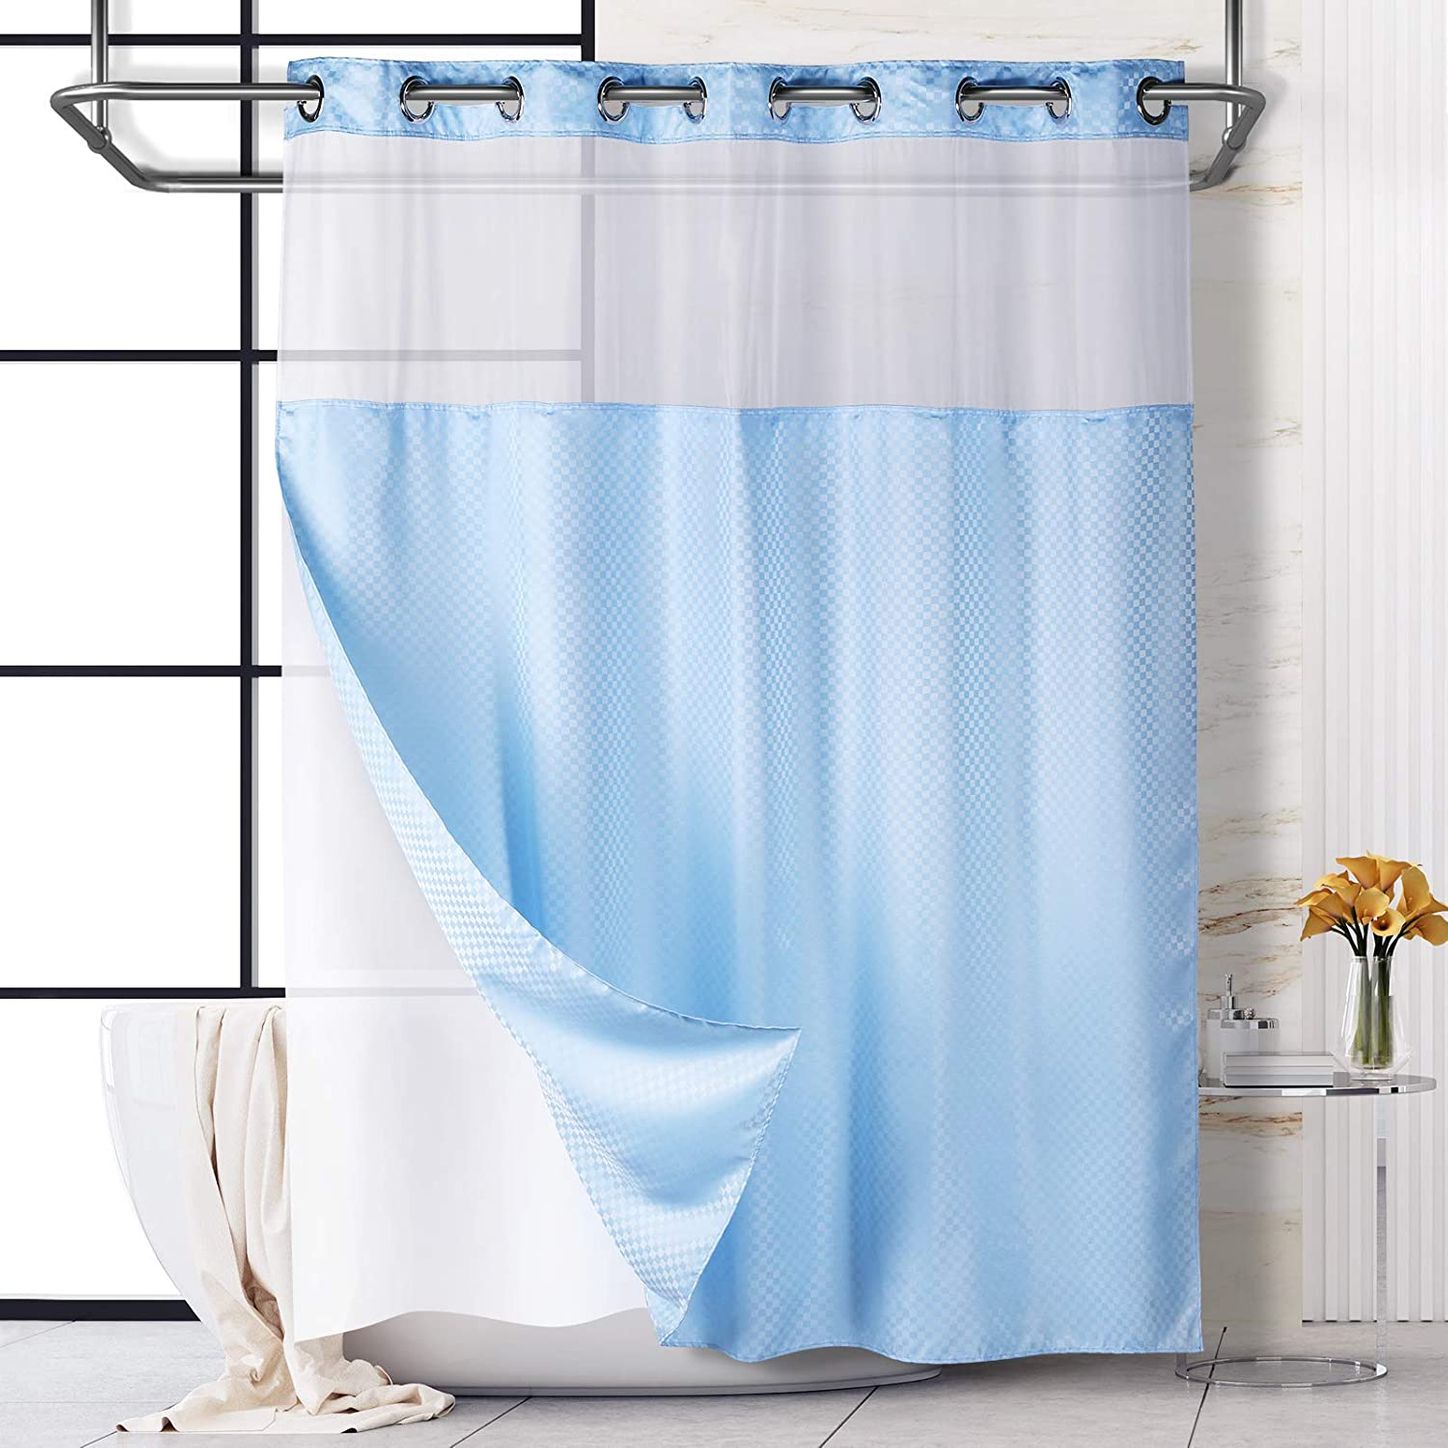 19 Best Shower Curtains 2021 The, Do 100 Polyester Shower Curtains Need A Liner